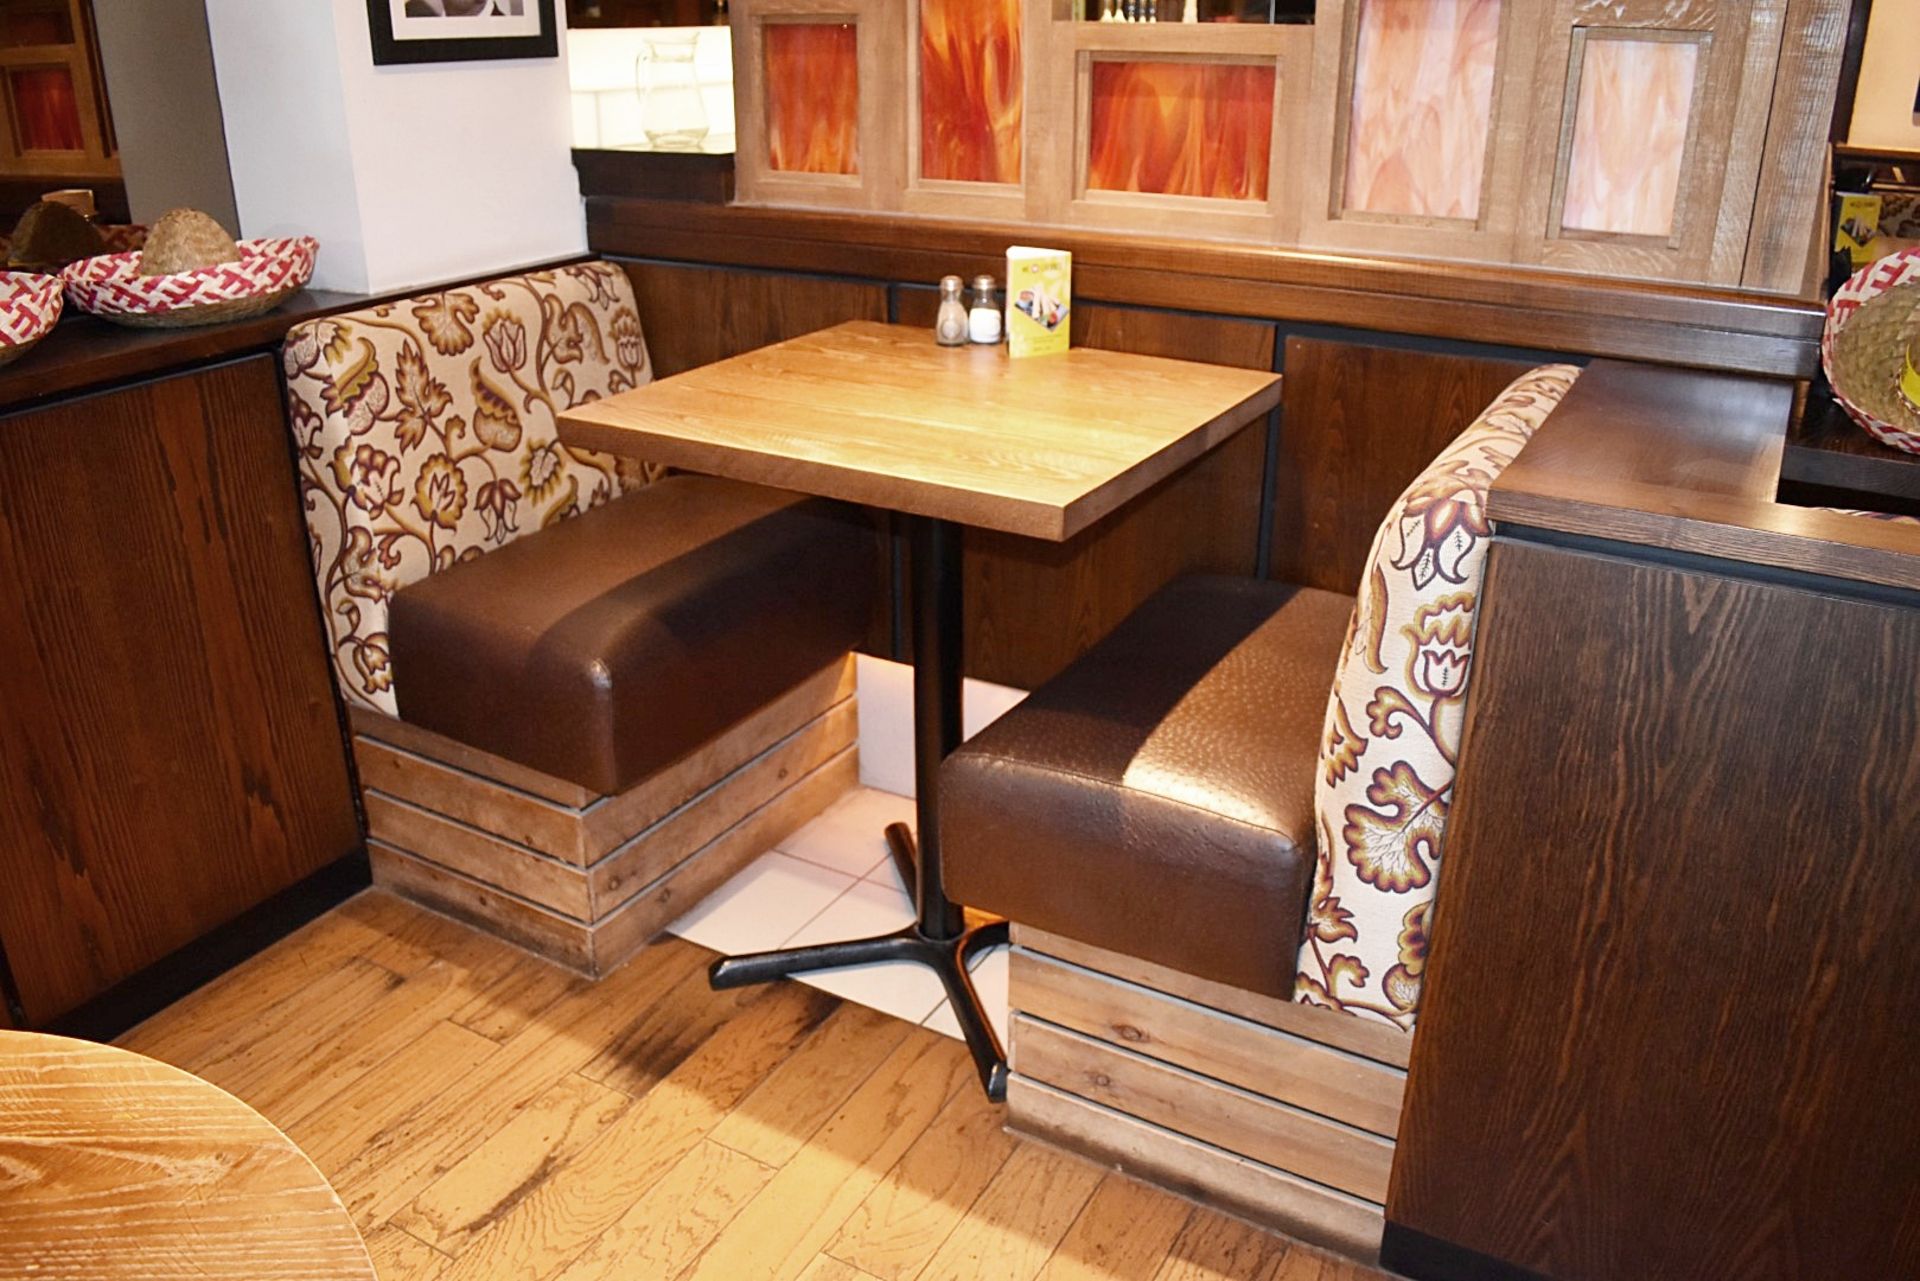 15-Pieces Of Restaurant Booth Seating Of Varying Length - Image 6 of 22